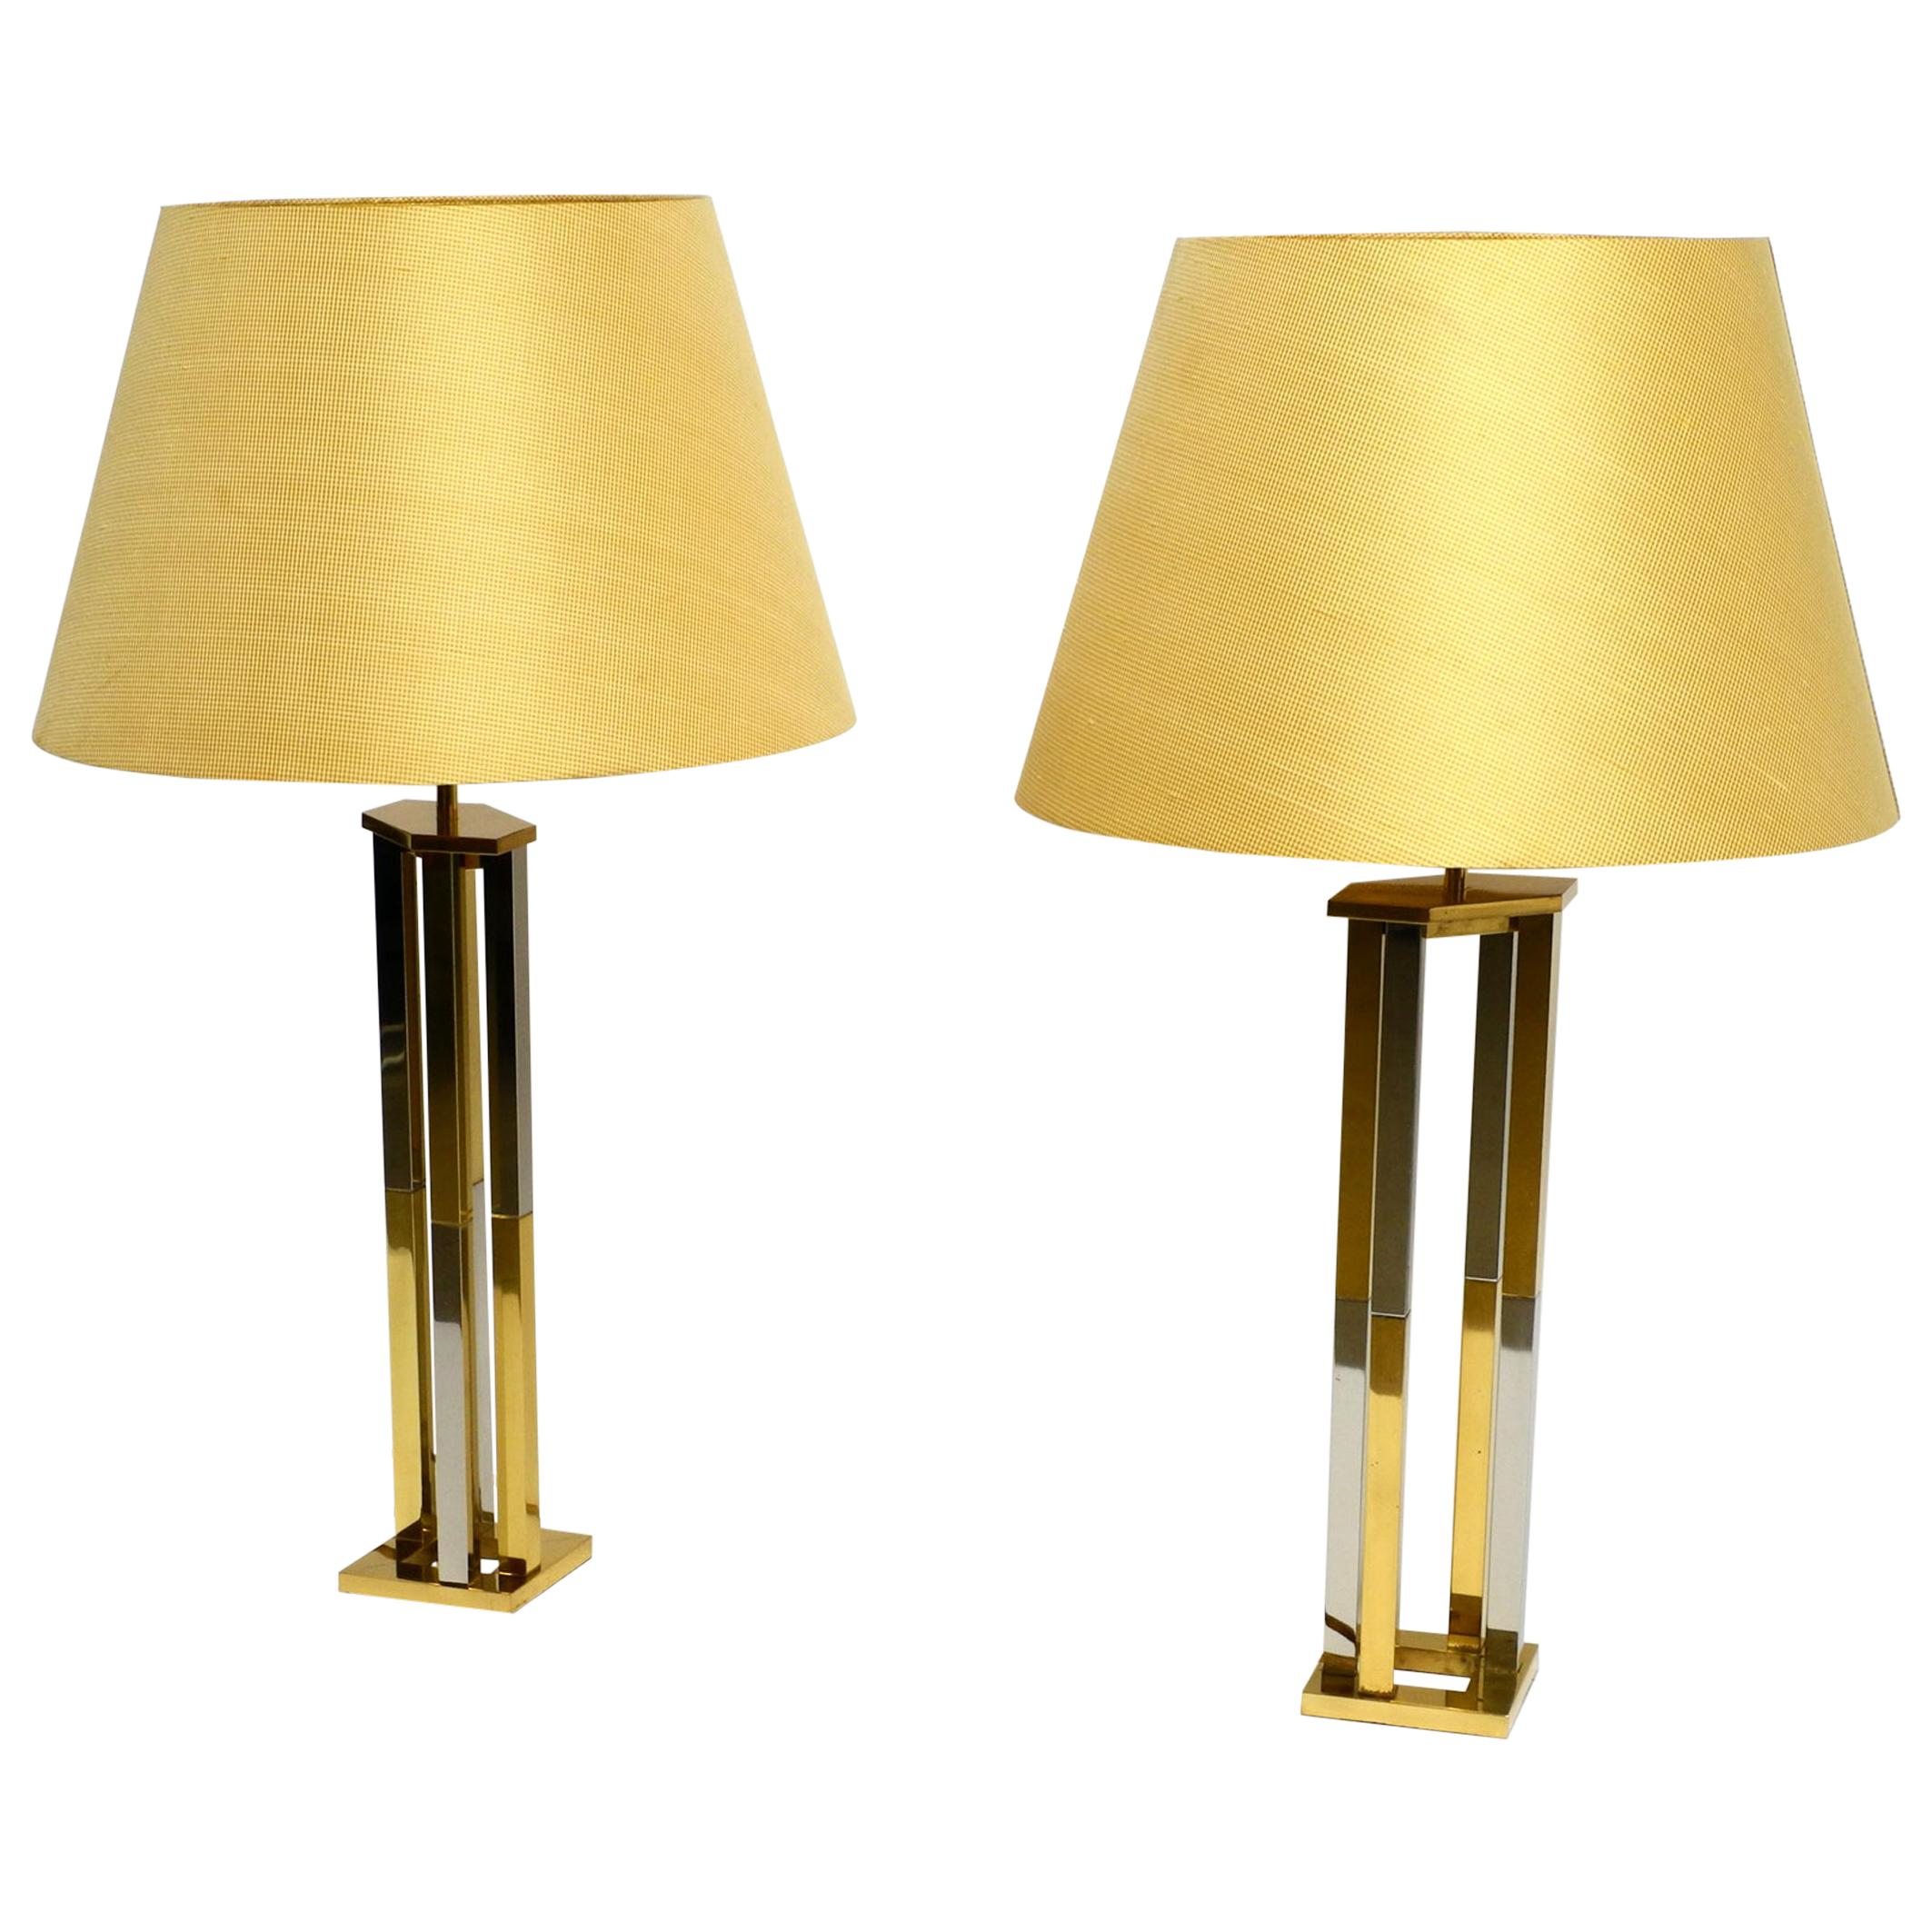 Pair of Very Rare Extra Large Brass Table Lamps from Vereinigte Werkstätten